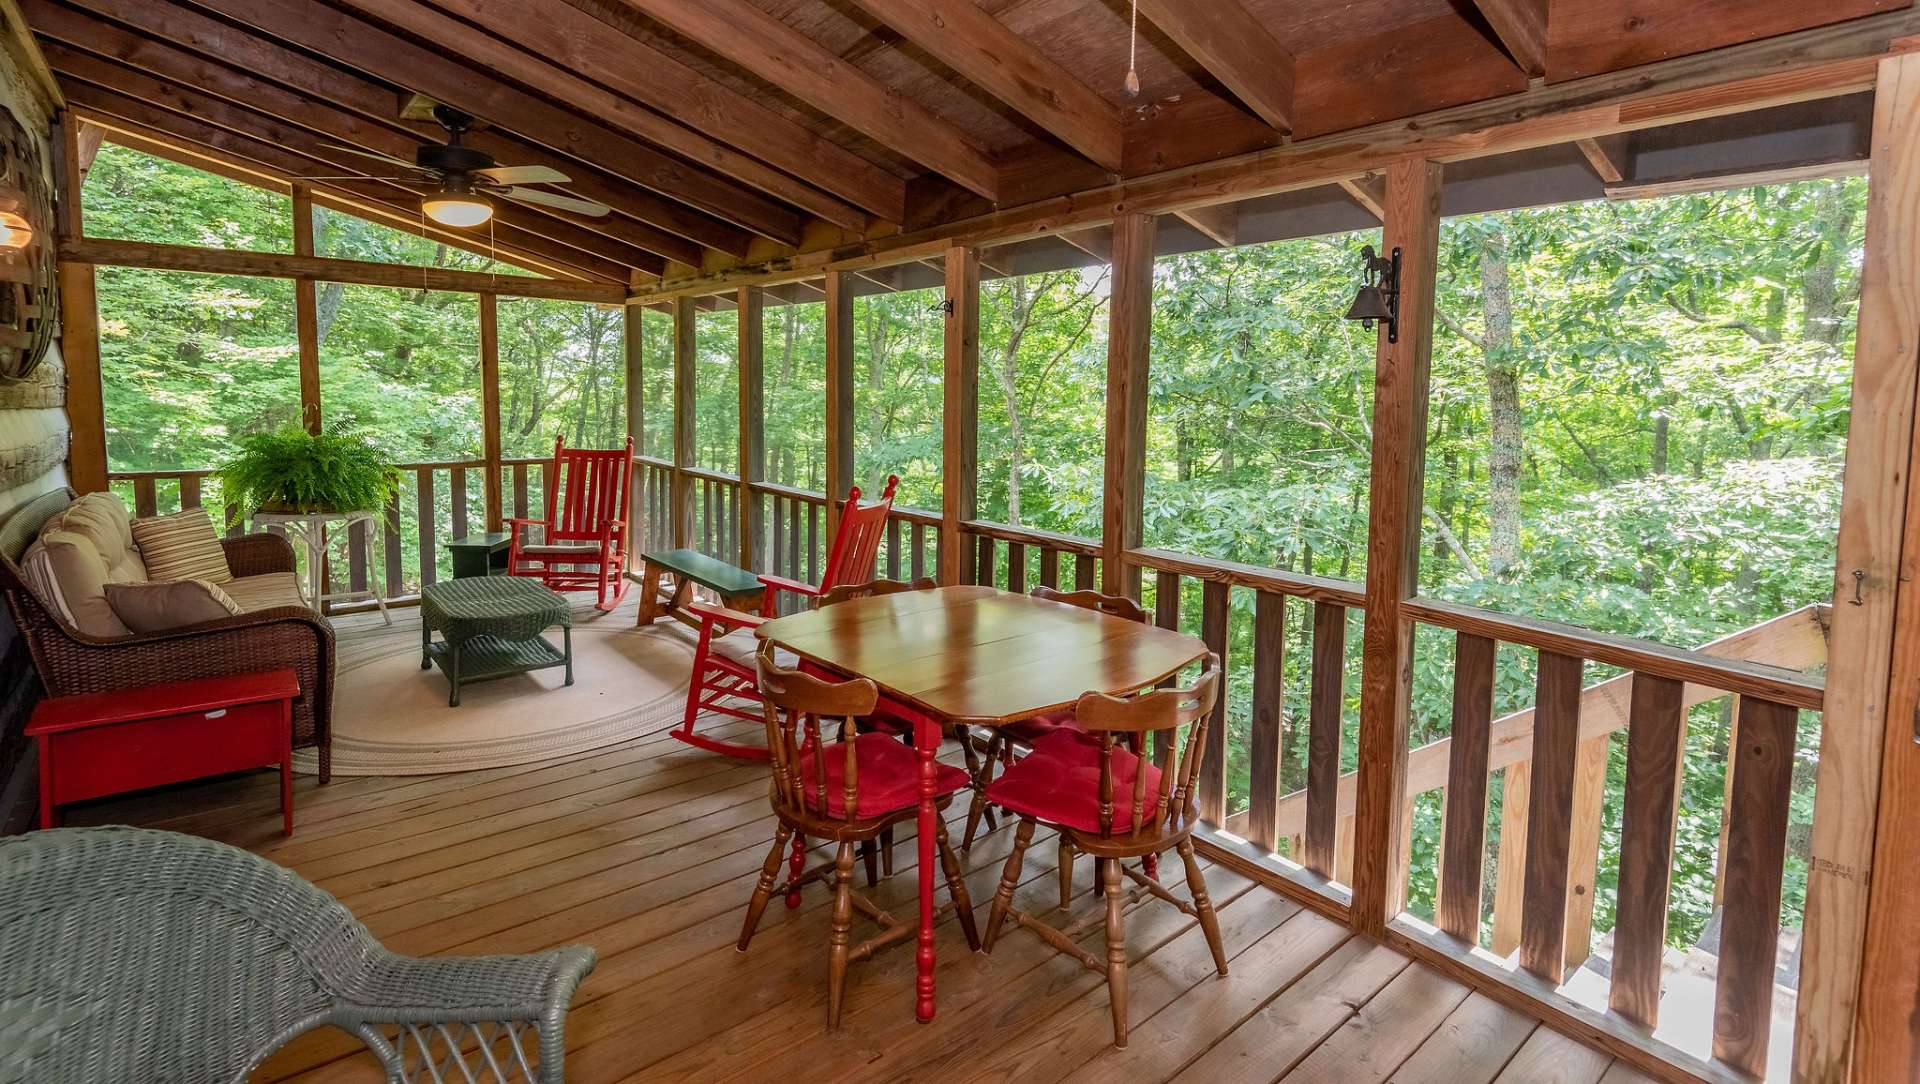 With an elevation over 4000 feet, this cabin enjoys cool summer breezes.